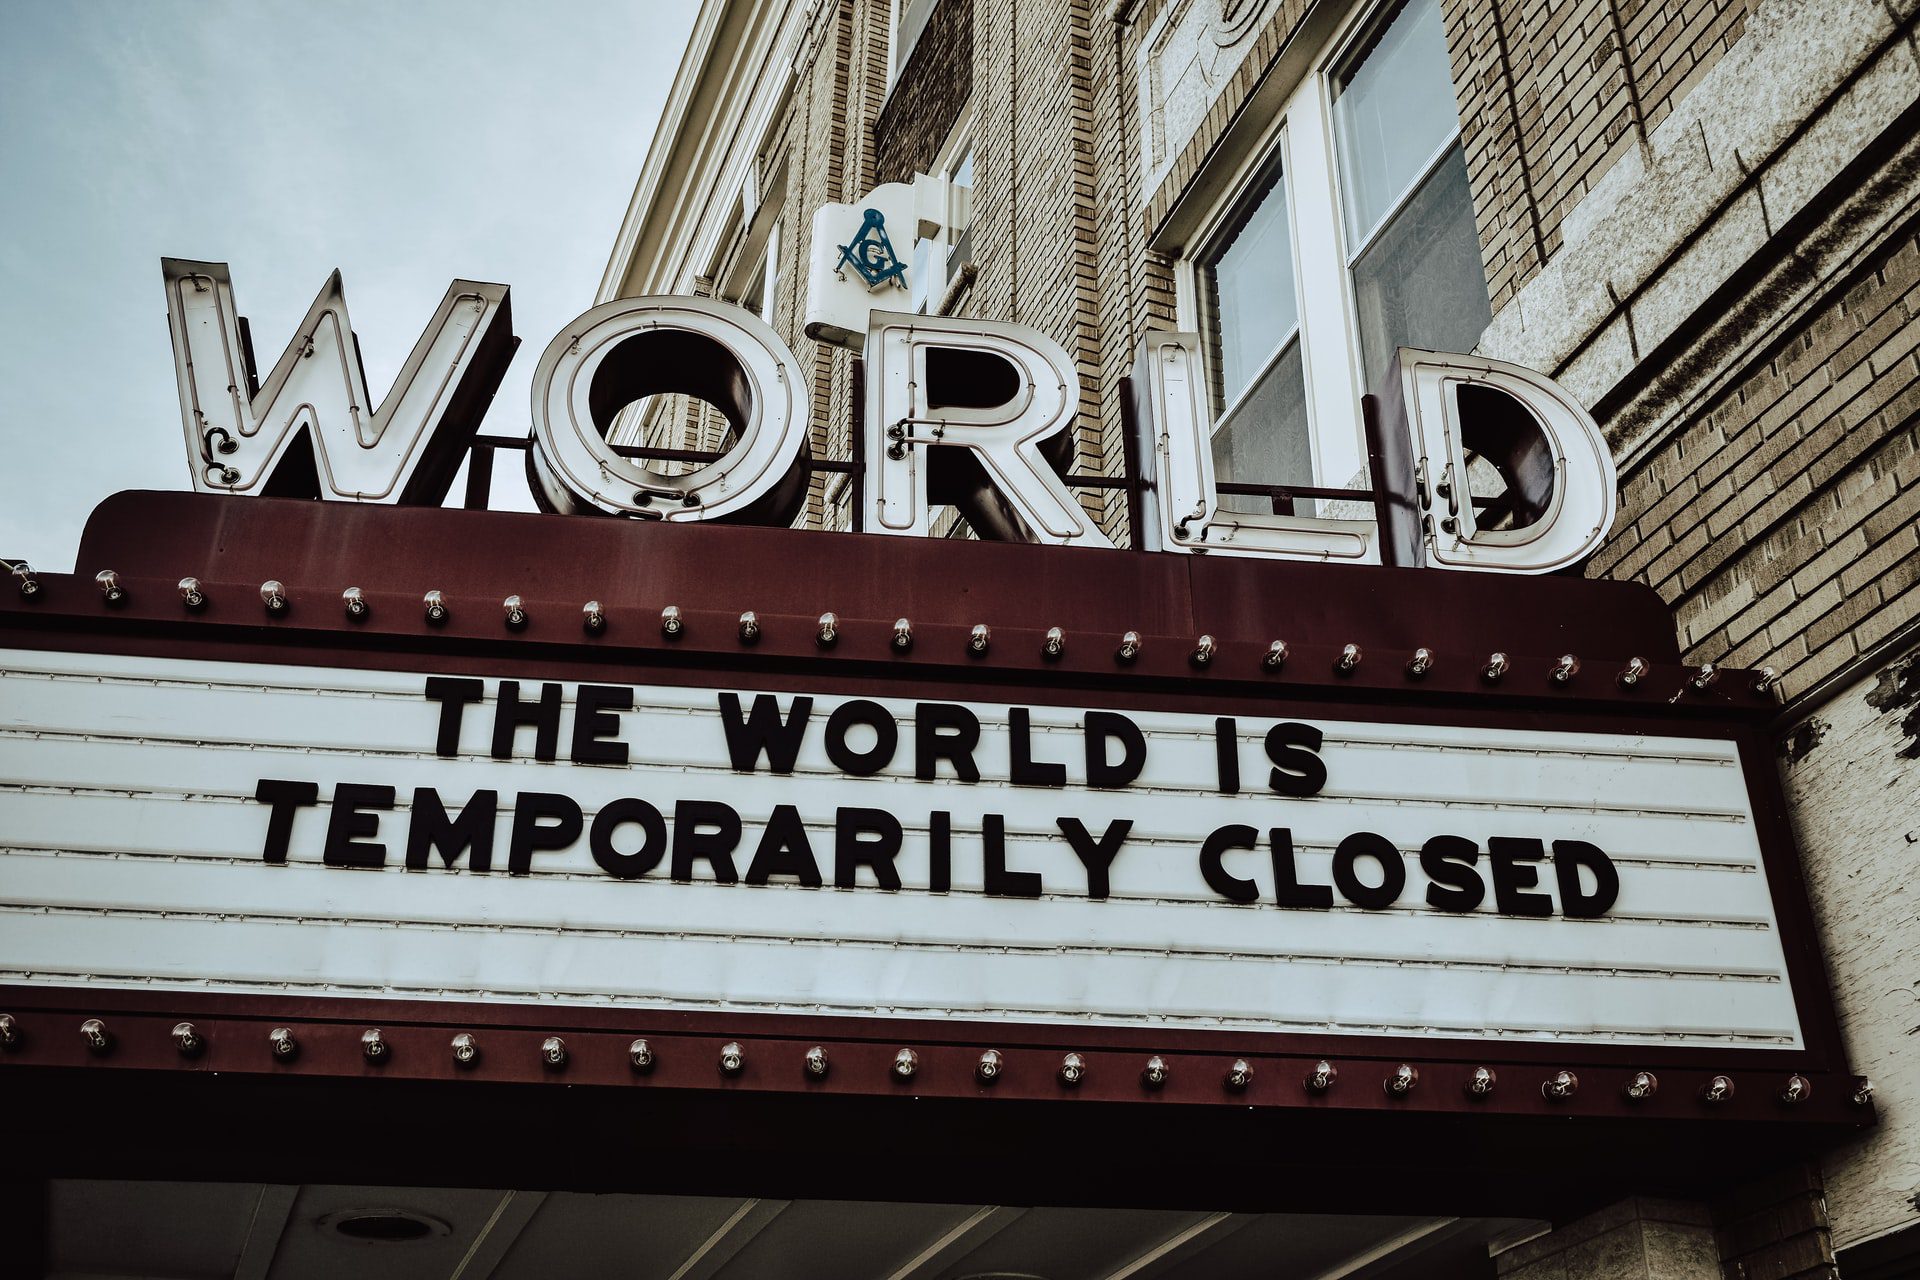 The World is Closed sign due to Covid 19